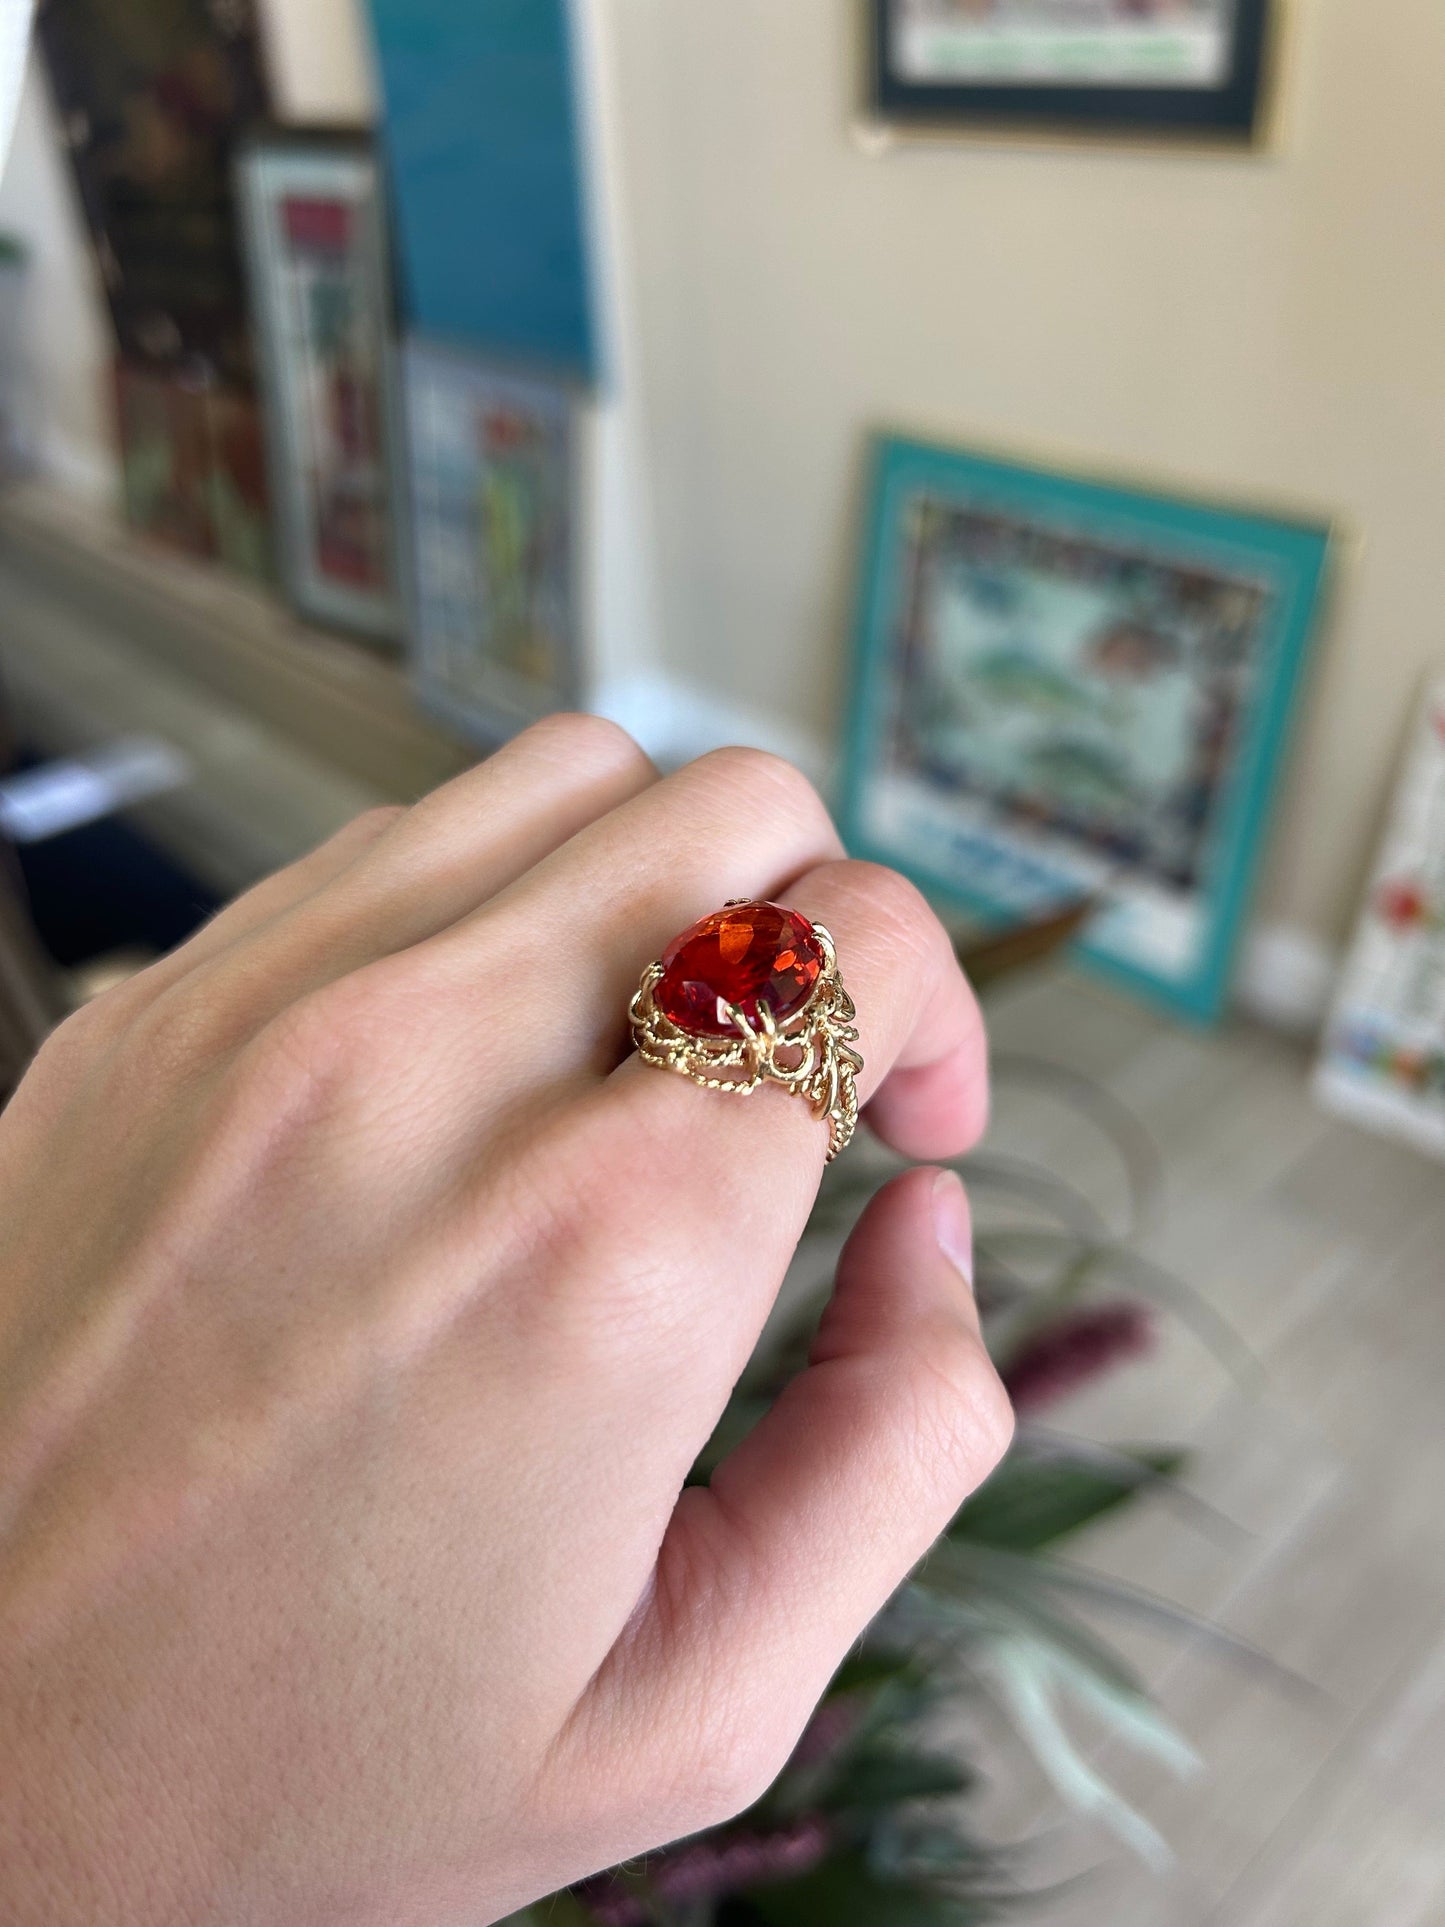 a person holding a ring with a red stone in it